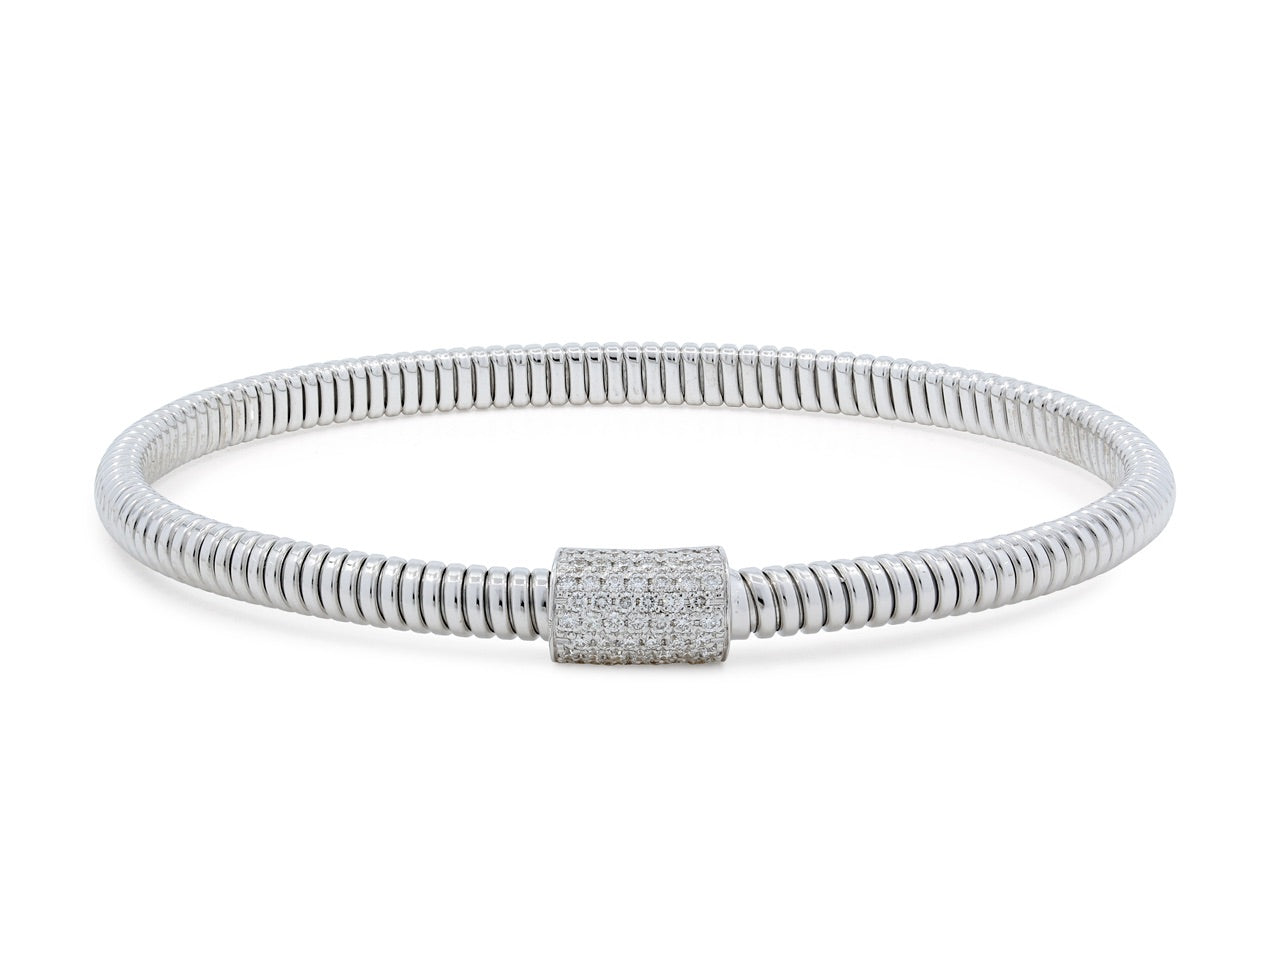 Thin Tubogas Bracelet with Diamond Clasp, in 18K White Gold, by Beladora